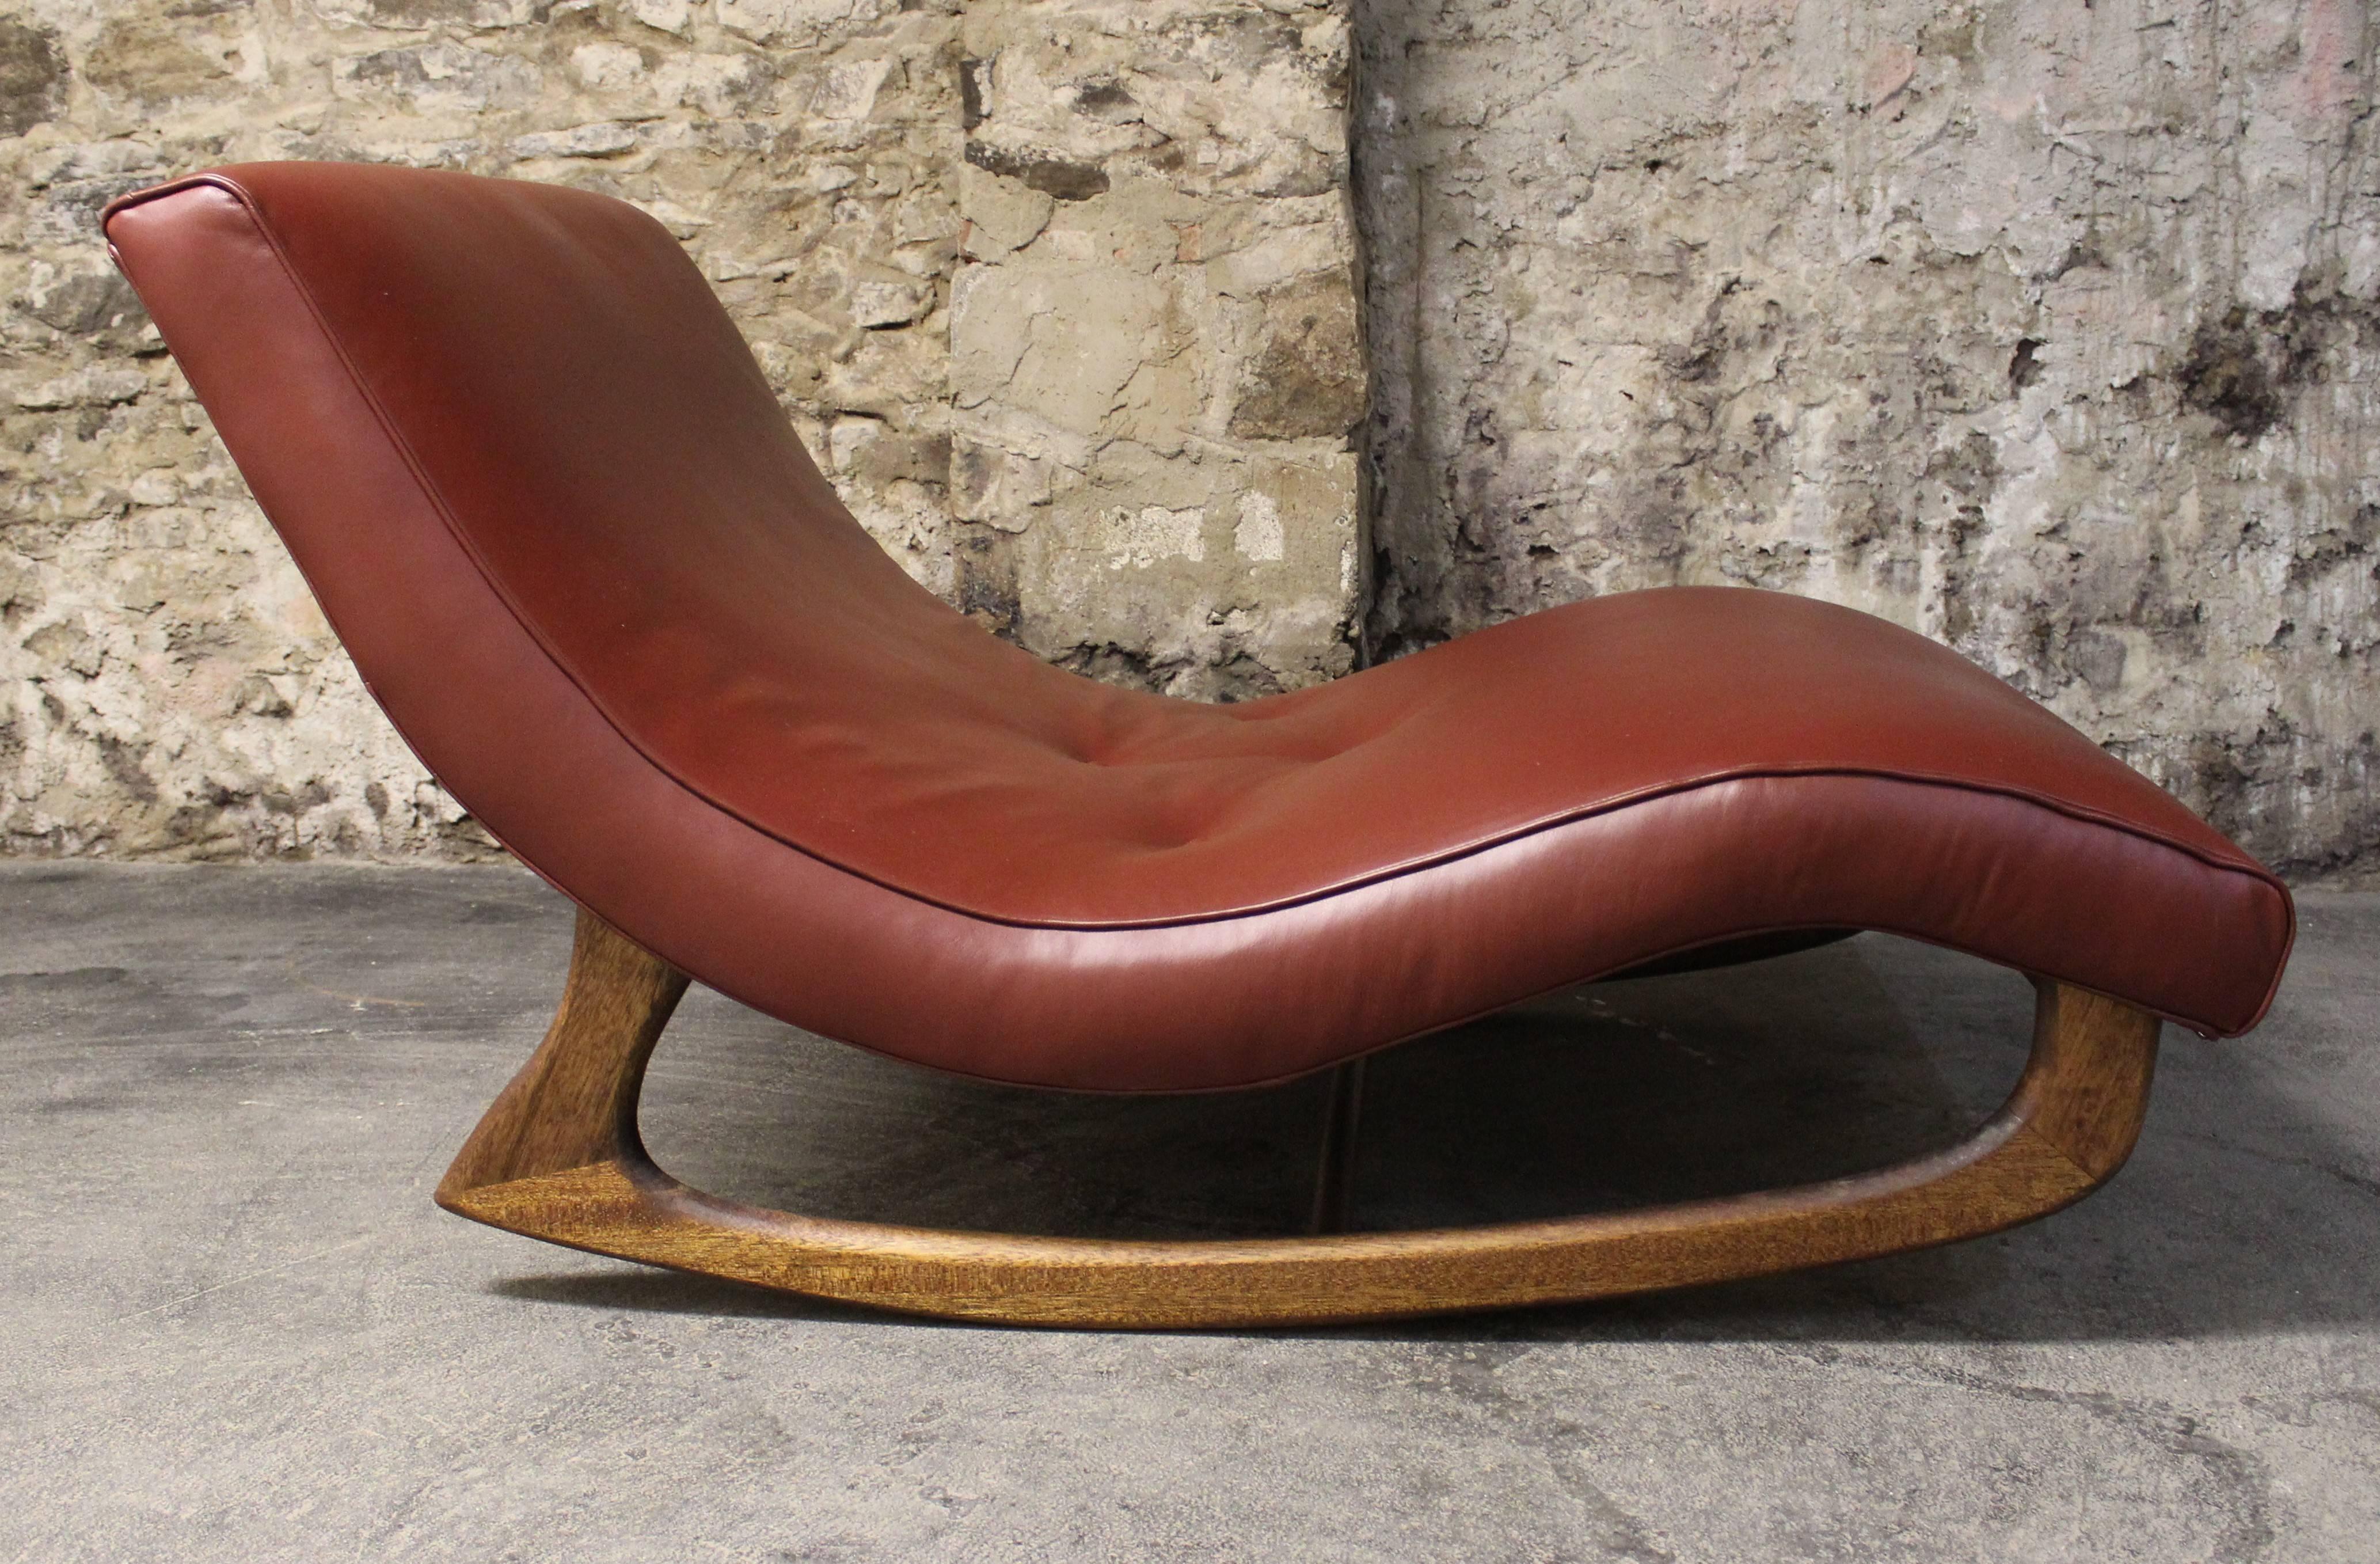 Mid-Century Modern wave chaise/rocking chair by Adrian Pearsall. This has been newly upholstered in leather and has a wide profile and walnut frame in a beautiful modernist form.